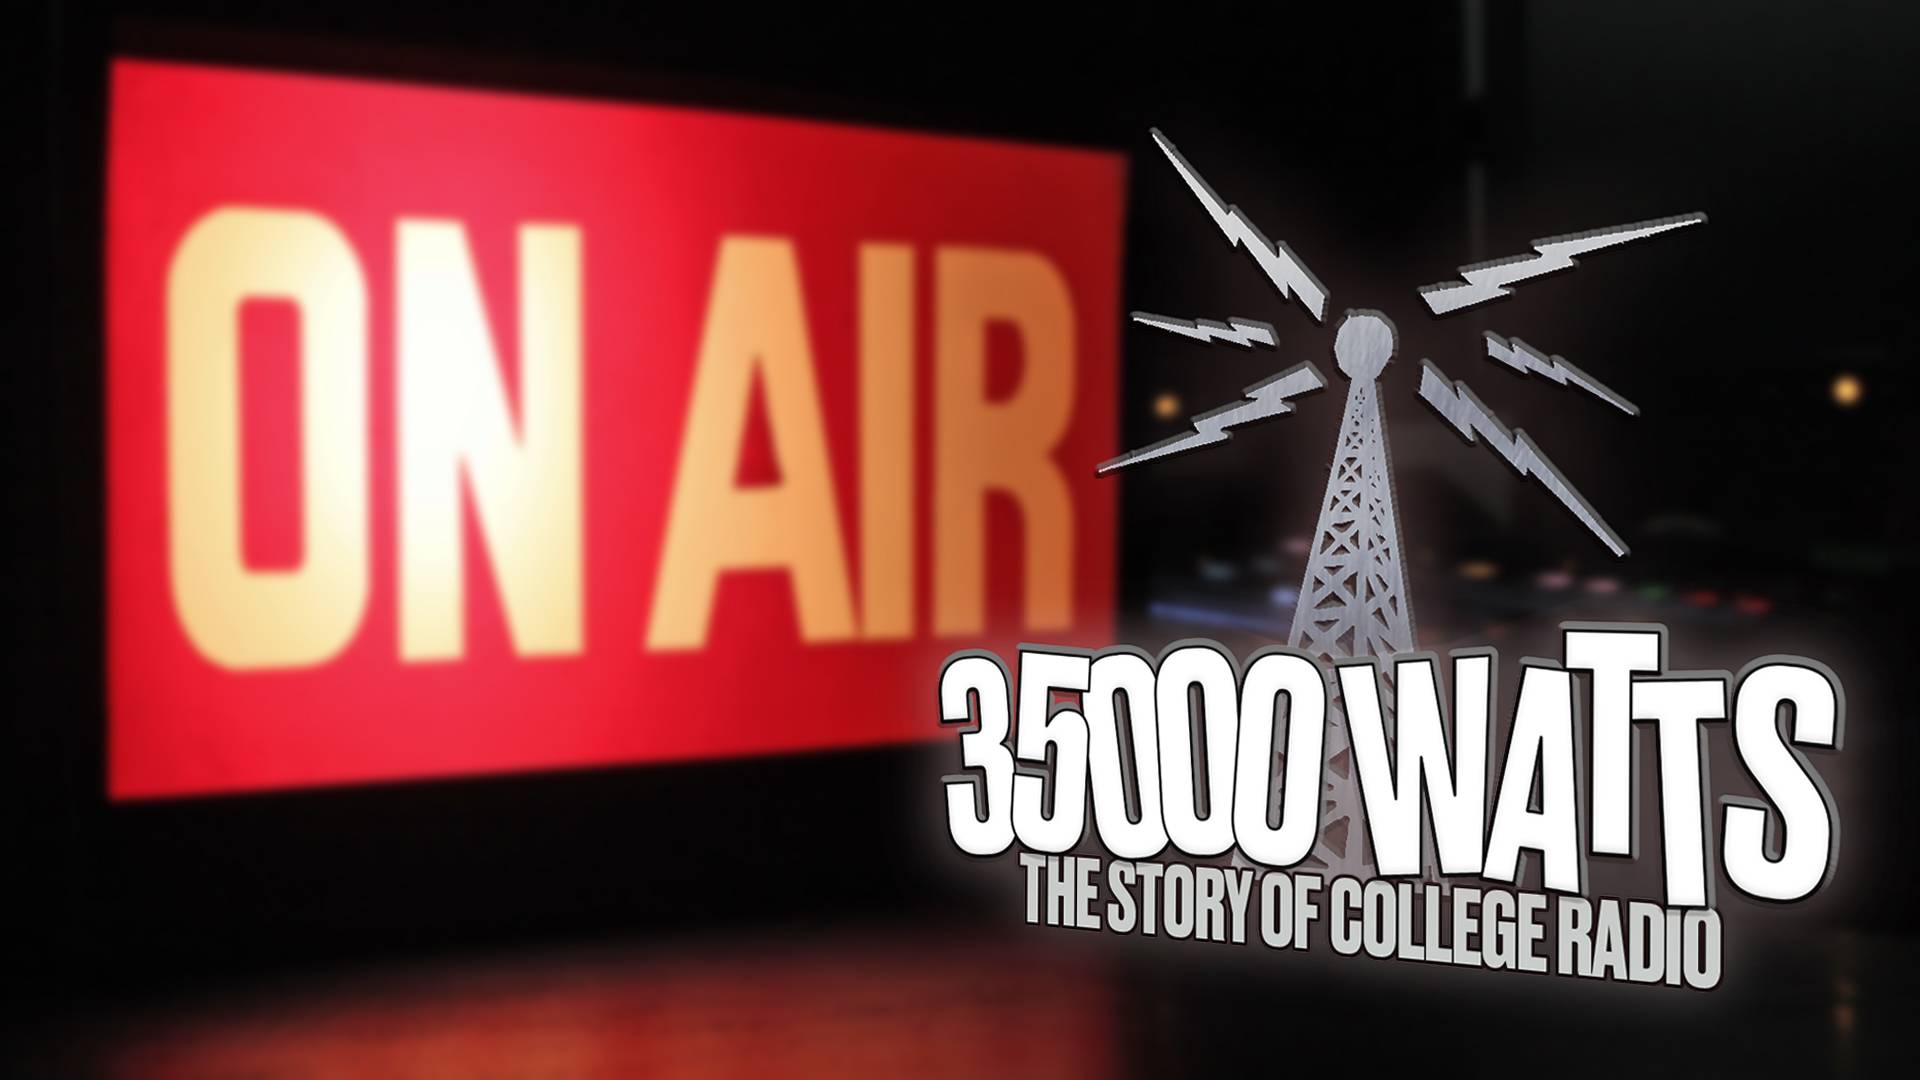 College Radio Foundation Partners With 35,000 Watts: The Story of College Radio